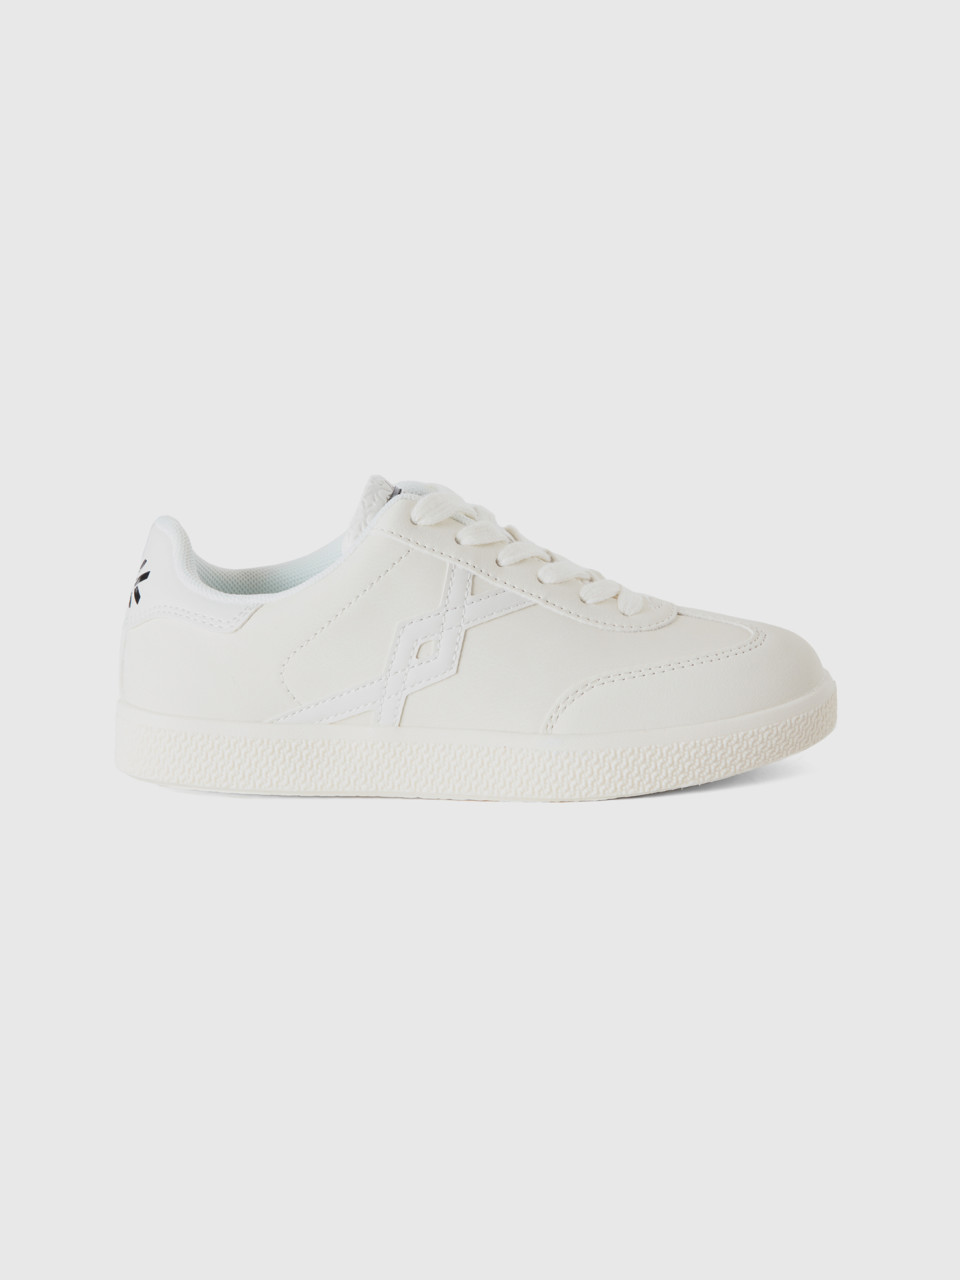 Benetton, Sneakers In Imitation Leather, Creamy White, Kids